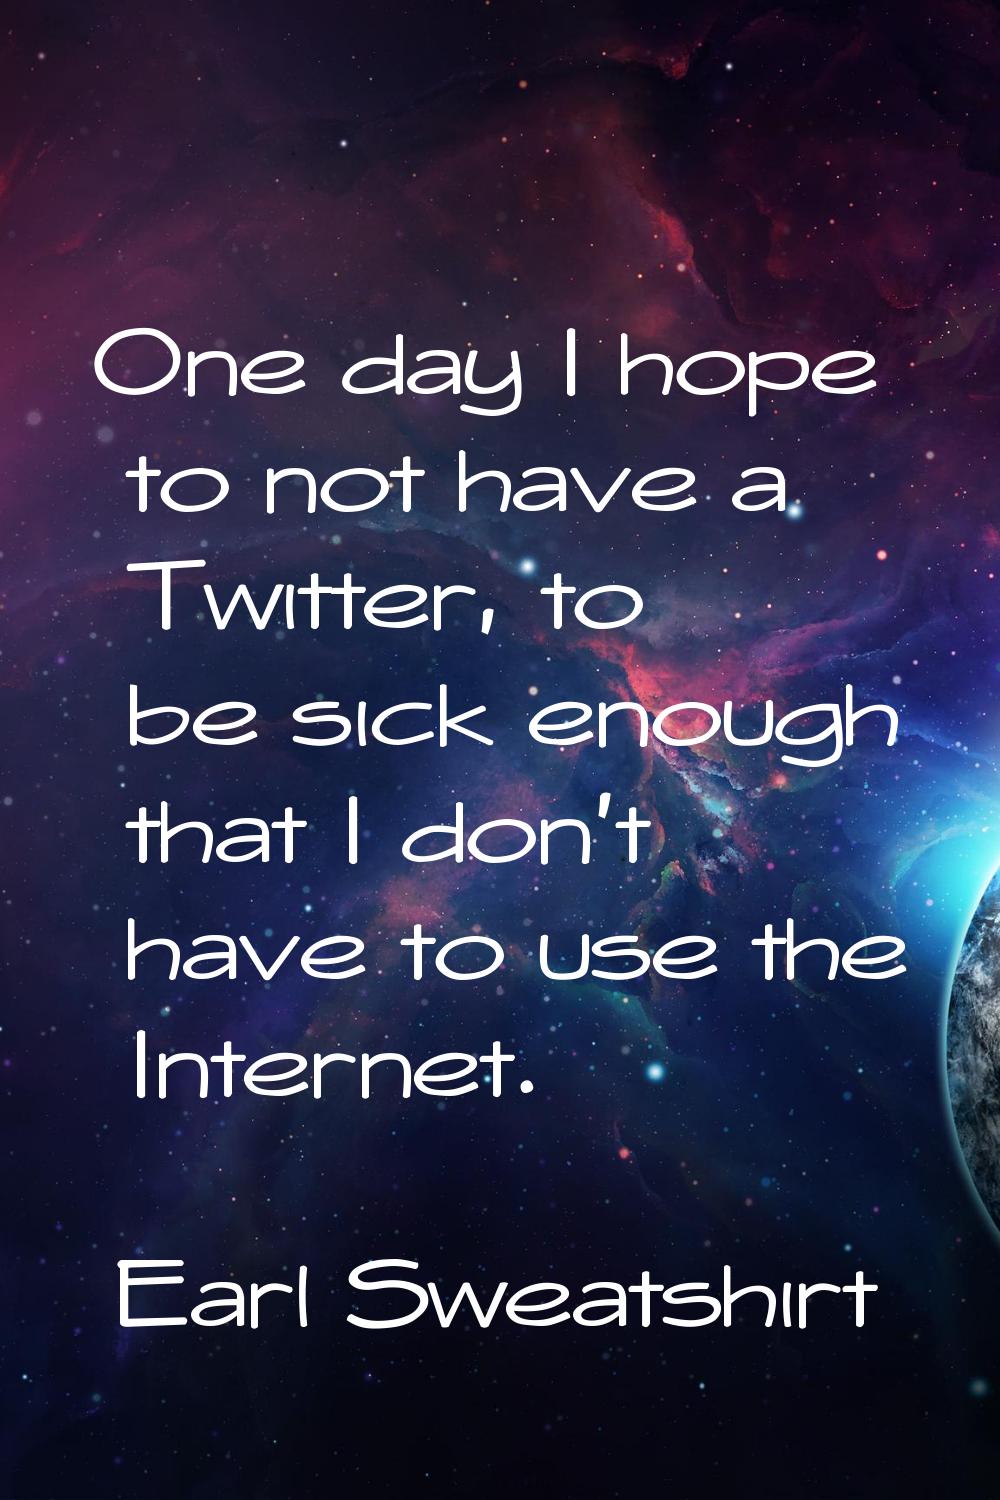 One day I hope to not have a Twitter, to be sick enough that I don't have to use the Internet.